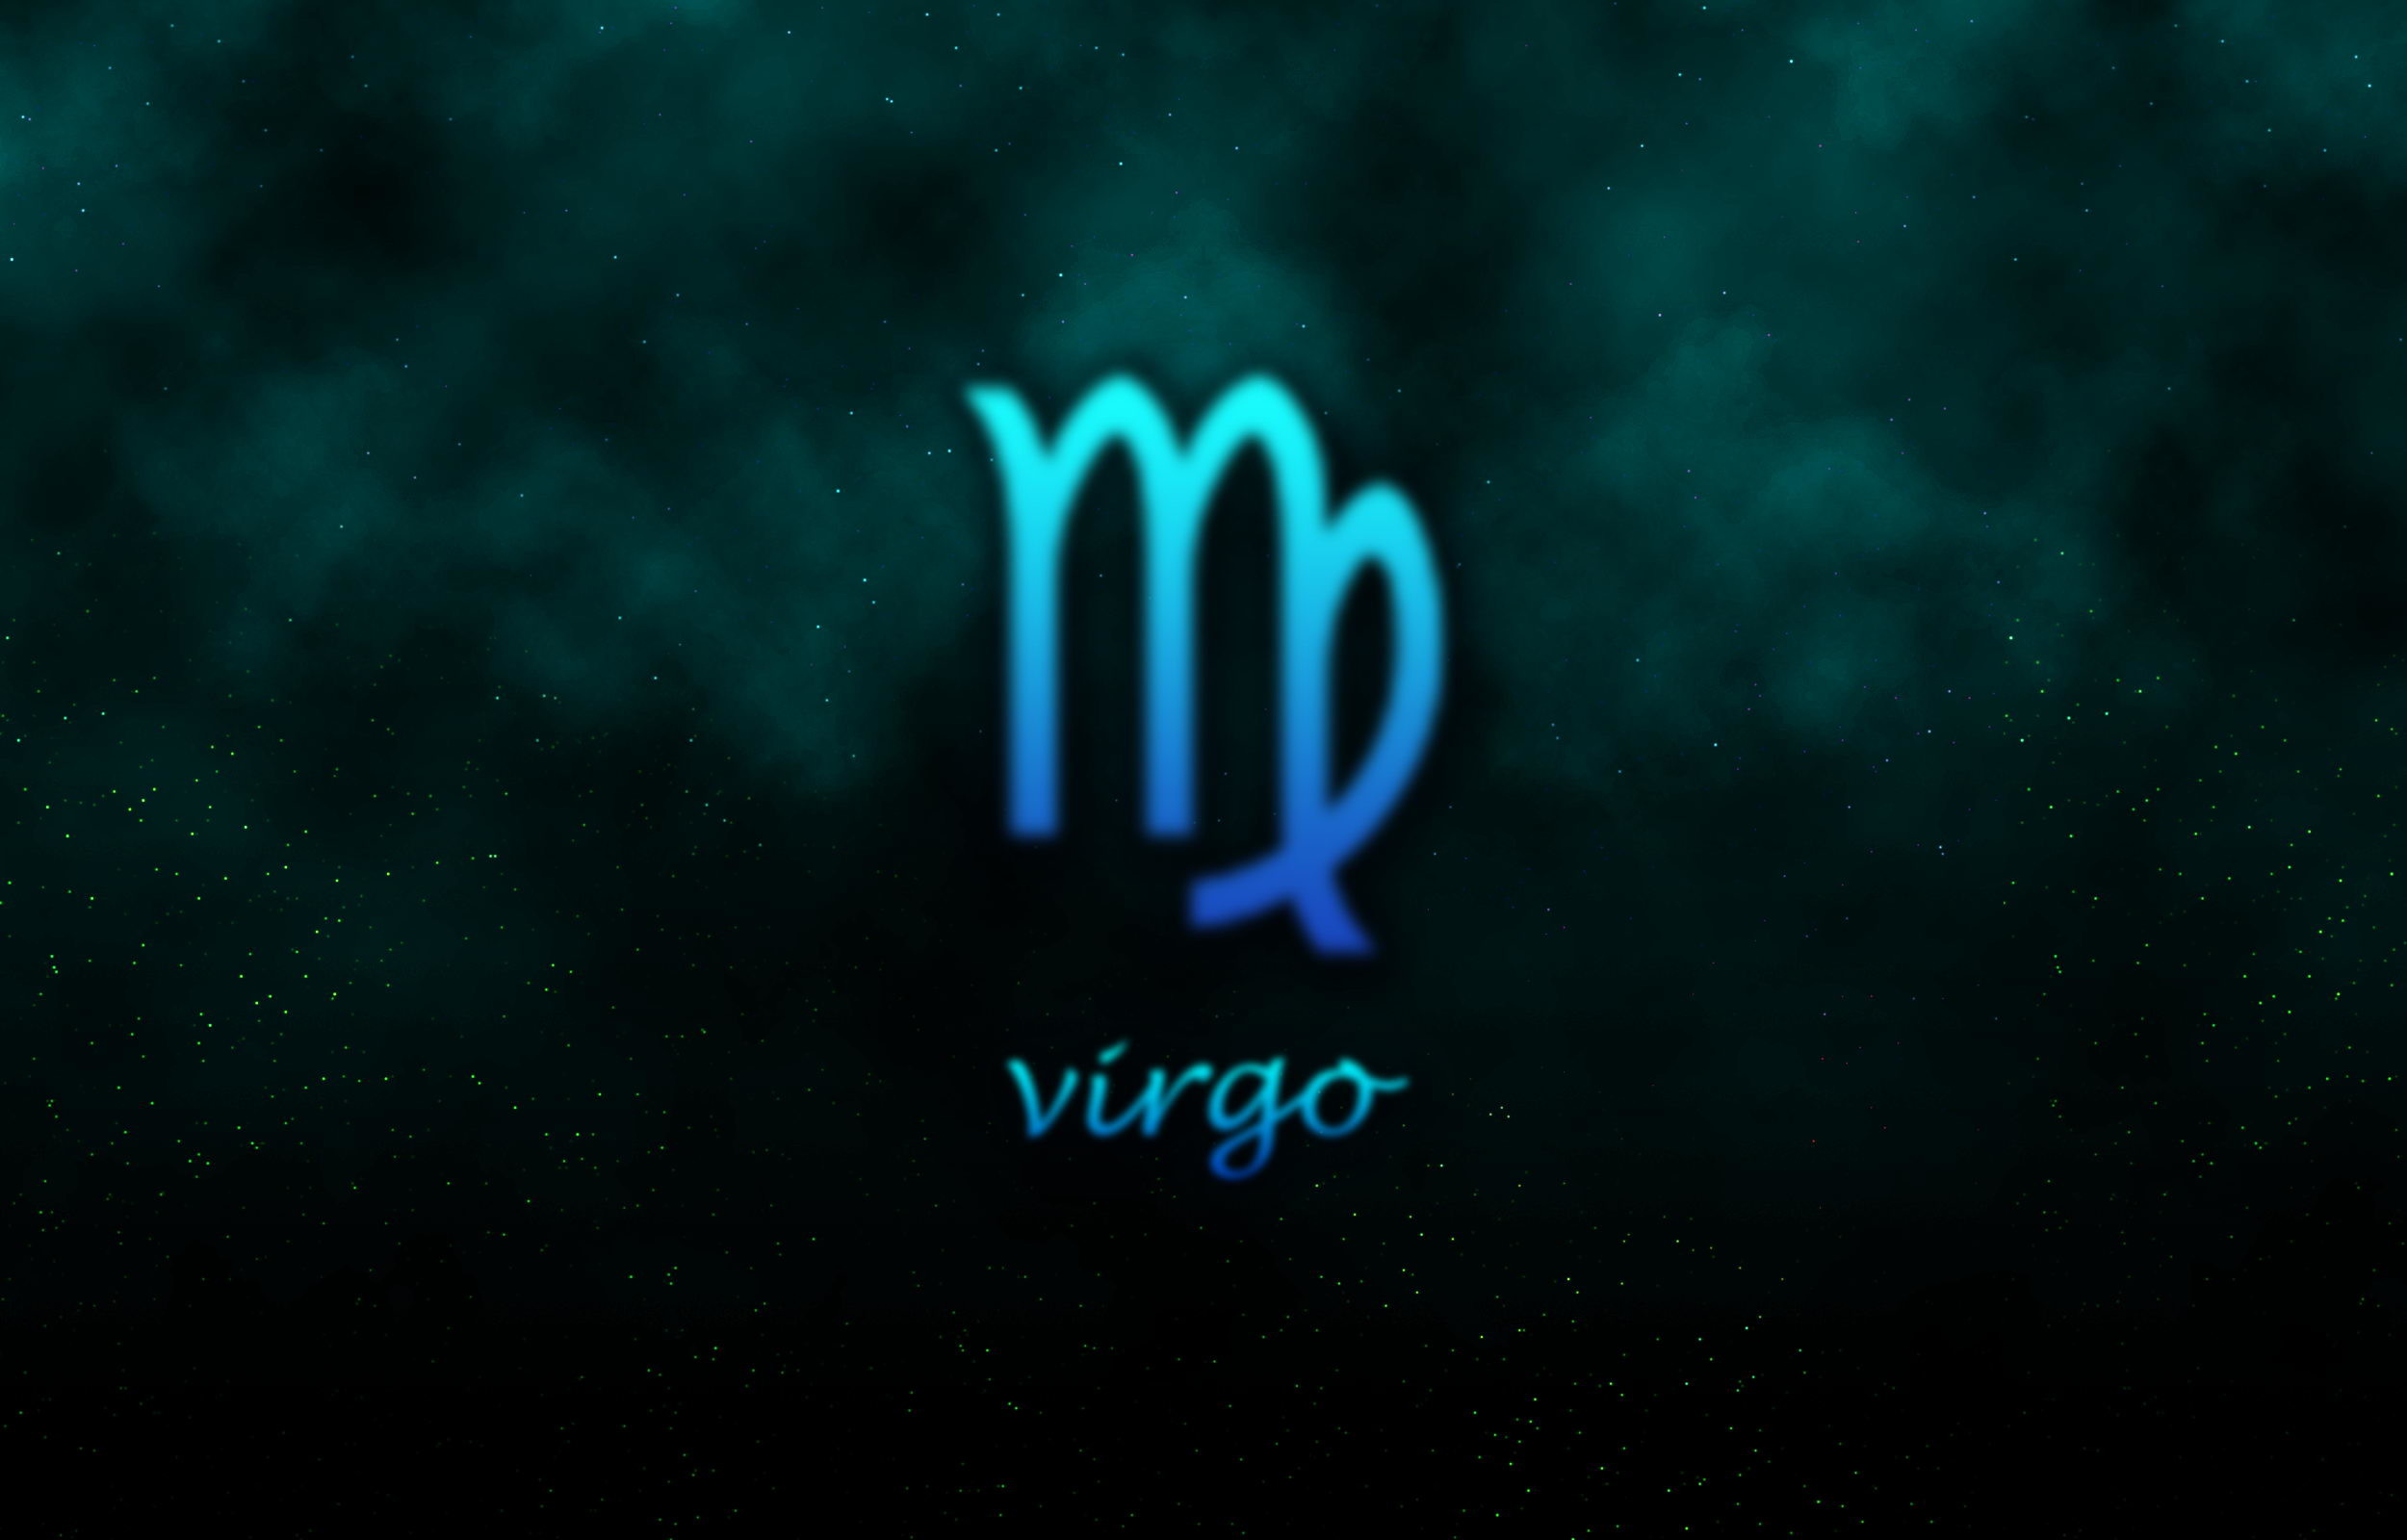 PERFECT IPHONE WALLPAPERS FOR VIRGO  This is iT Original